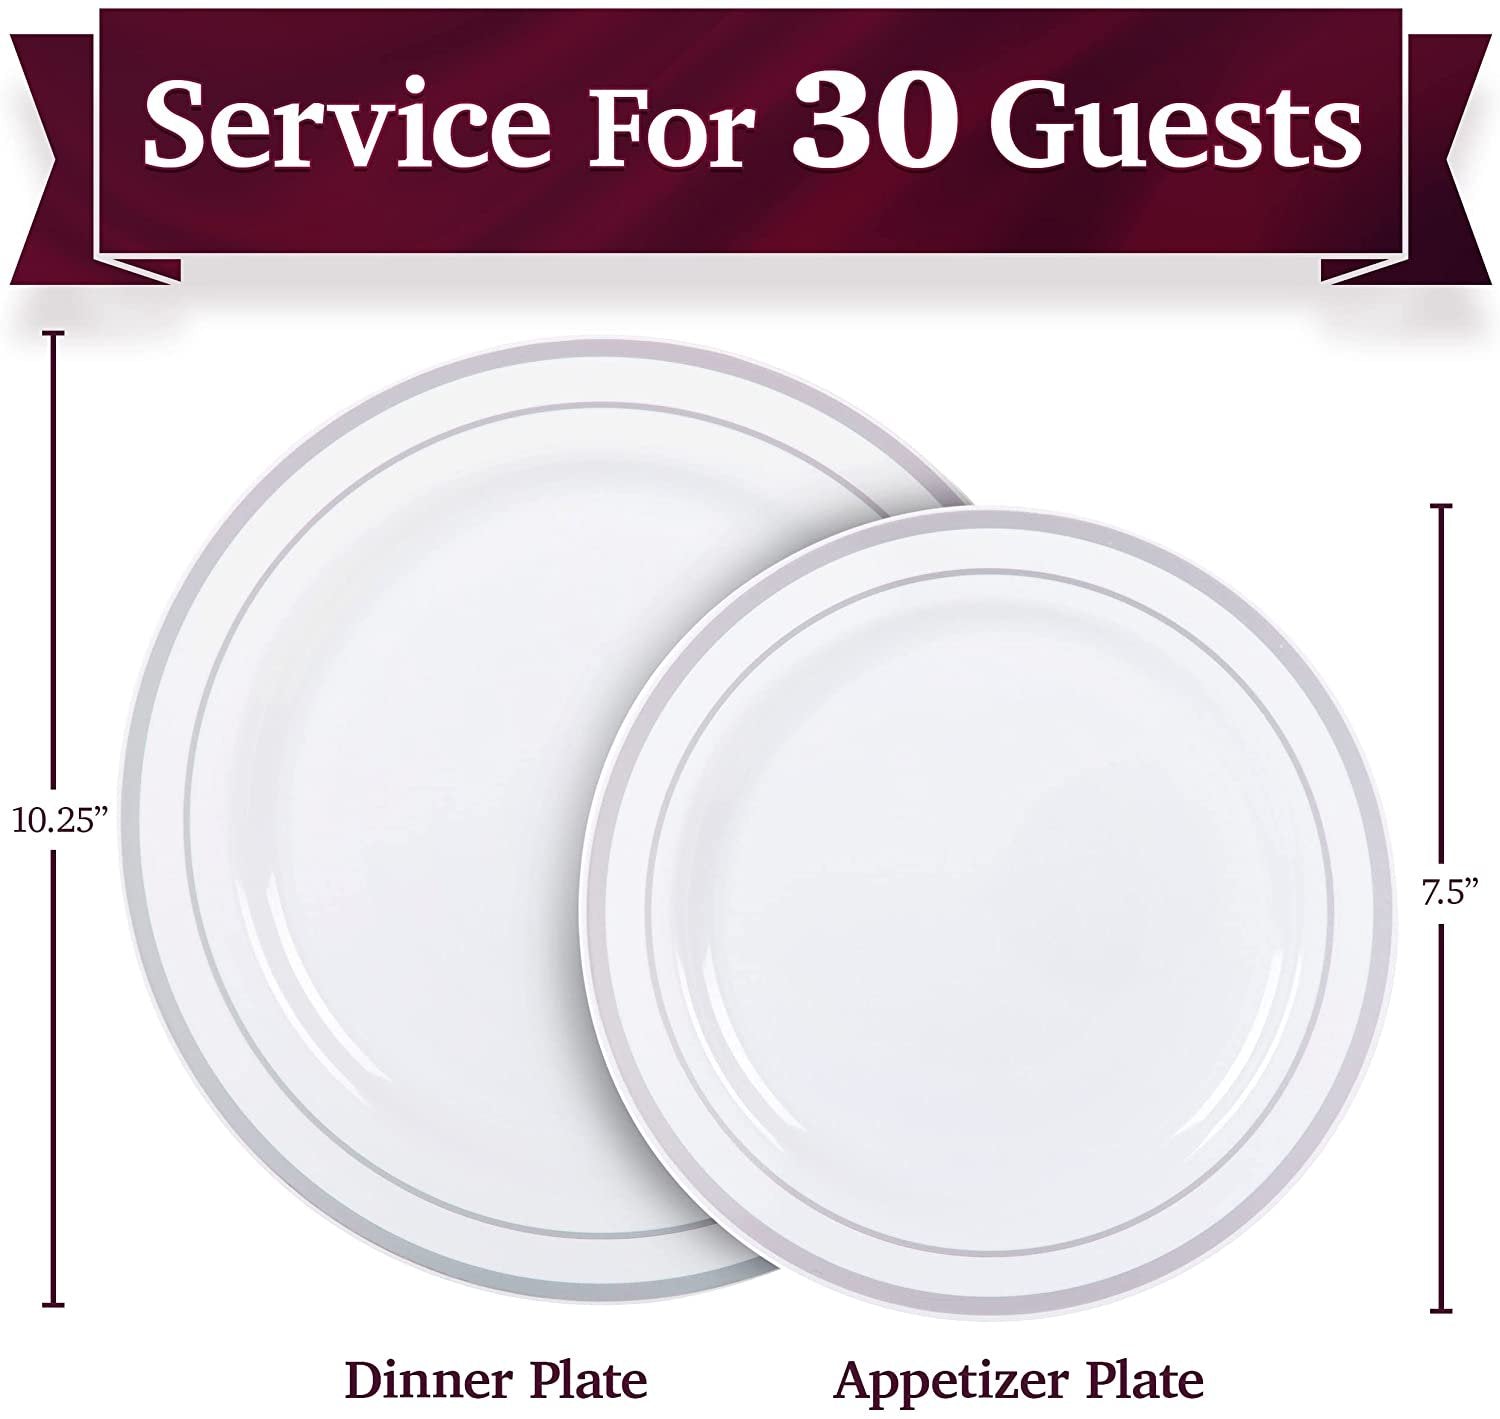 60 Plastic Plates with White and Gold Rim, Heavy Duty Plastic Disposable Party Plates 30 Dinner Plates 10.25" + 30 Salad Dessert Appetizer Plates 7.5", Premium Elegant for Weddings Holidays Events